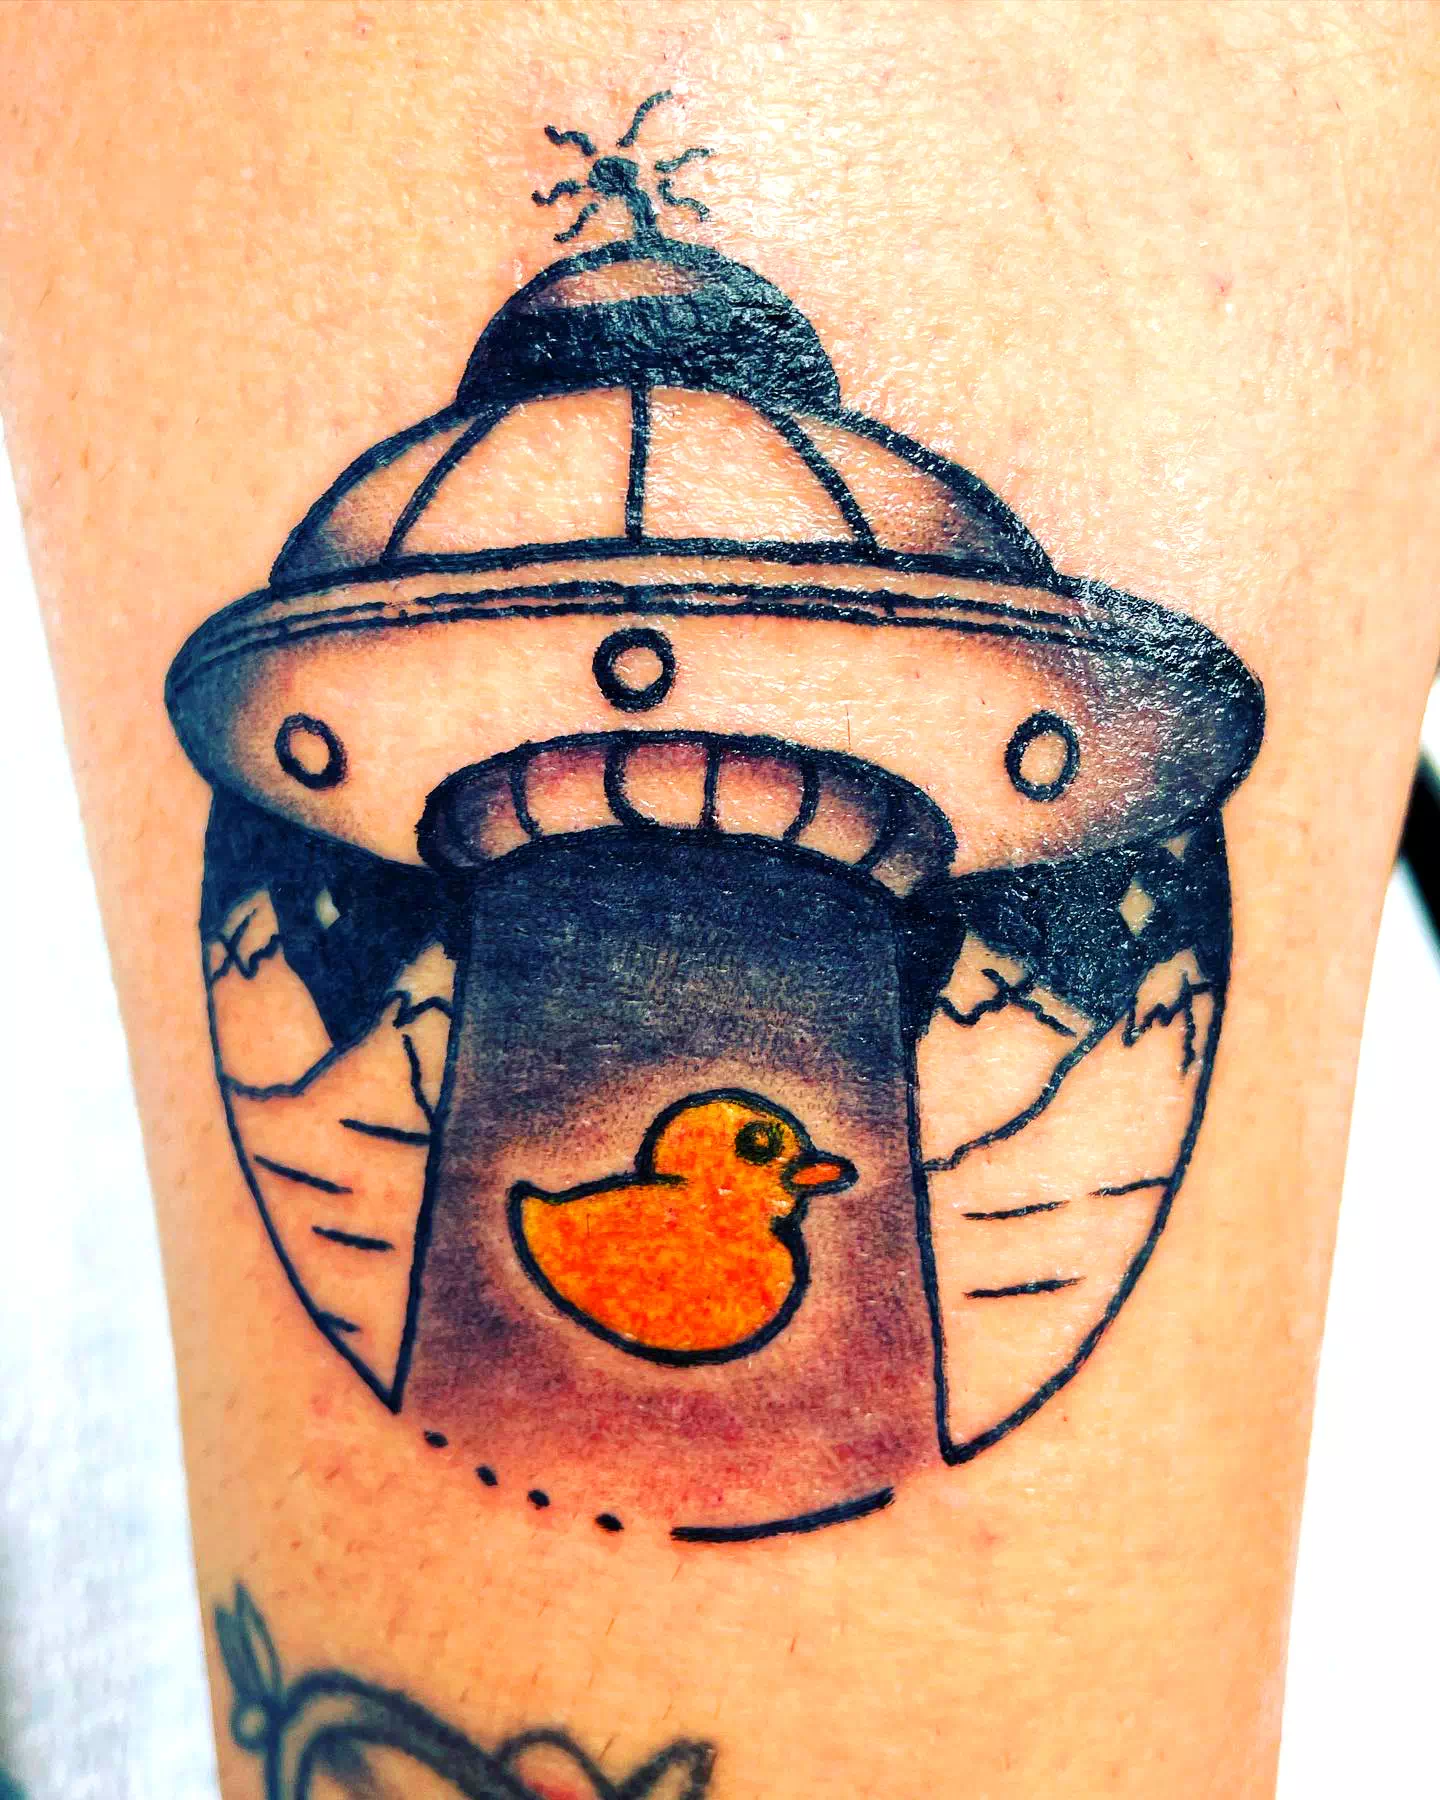 The Tiny Abduction Alien Tattoo 1